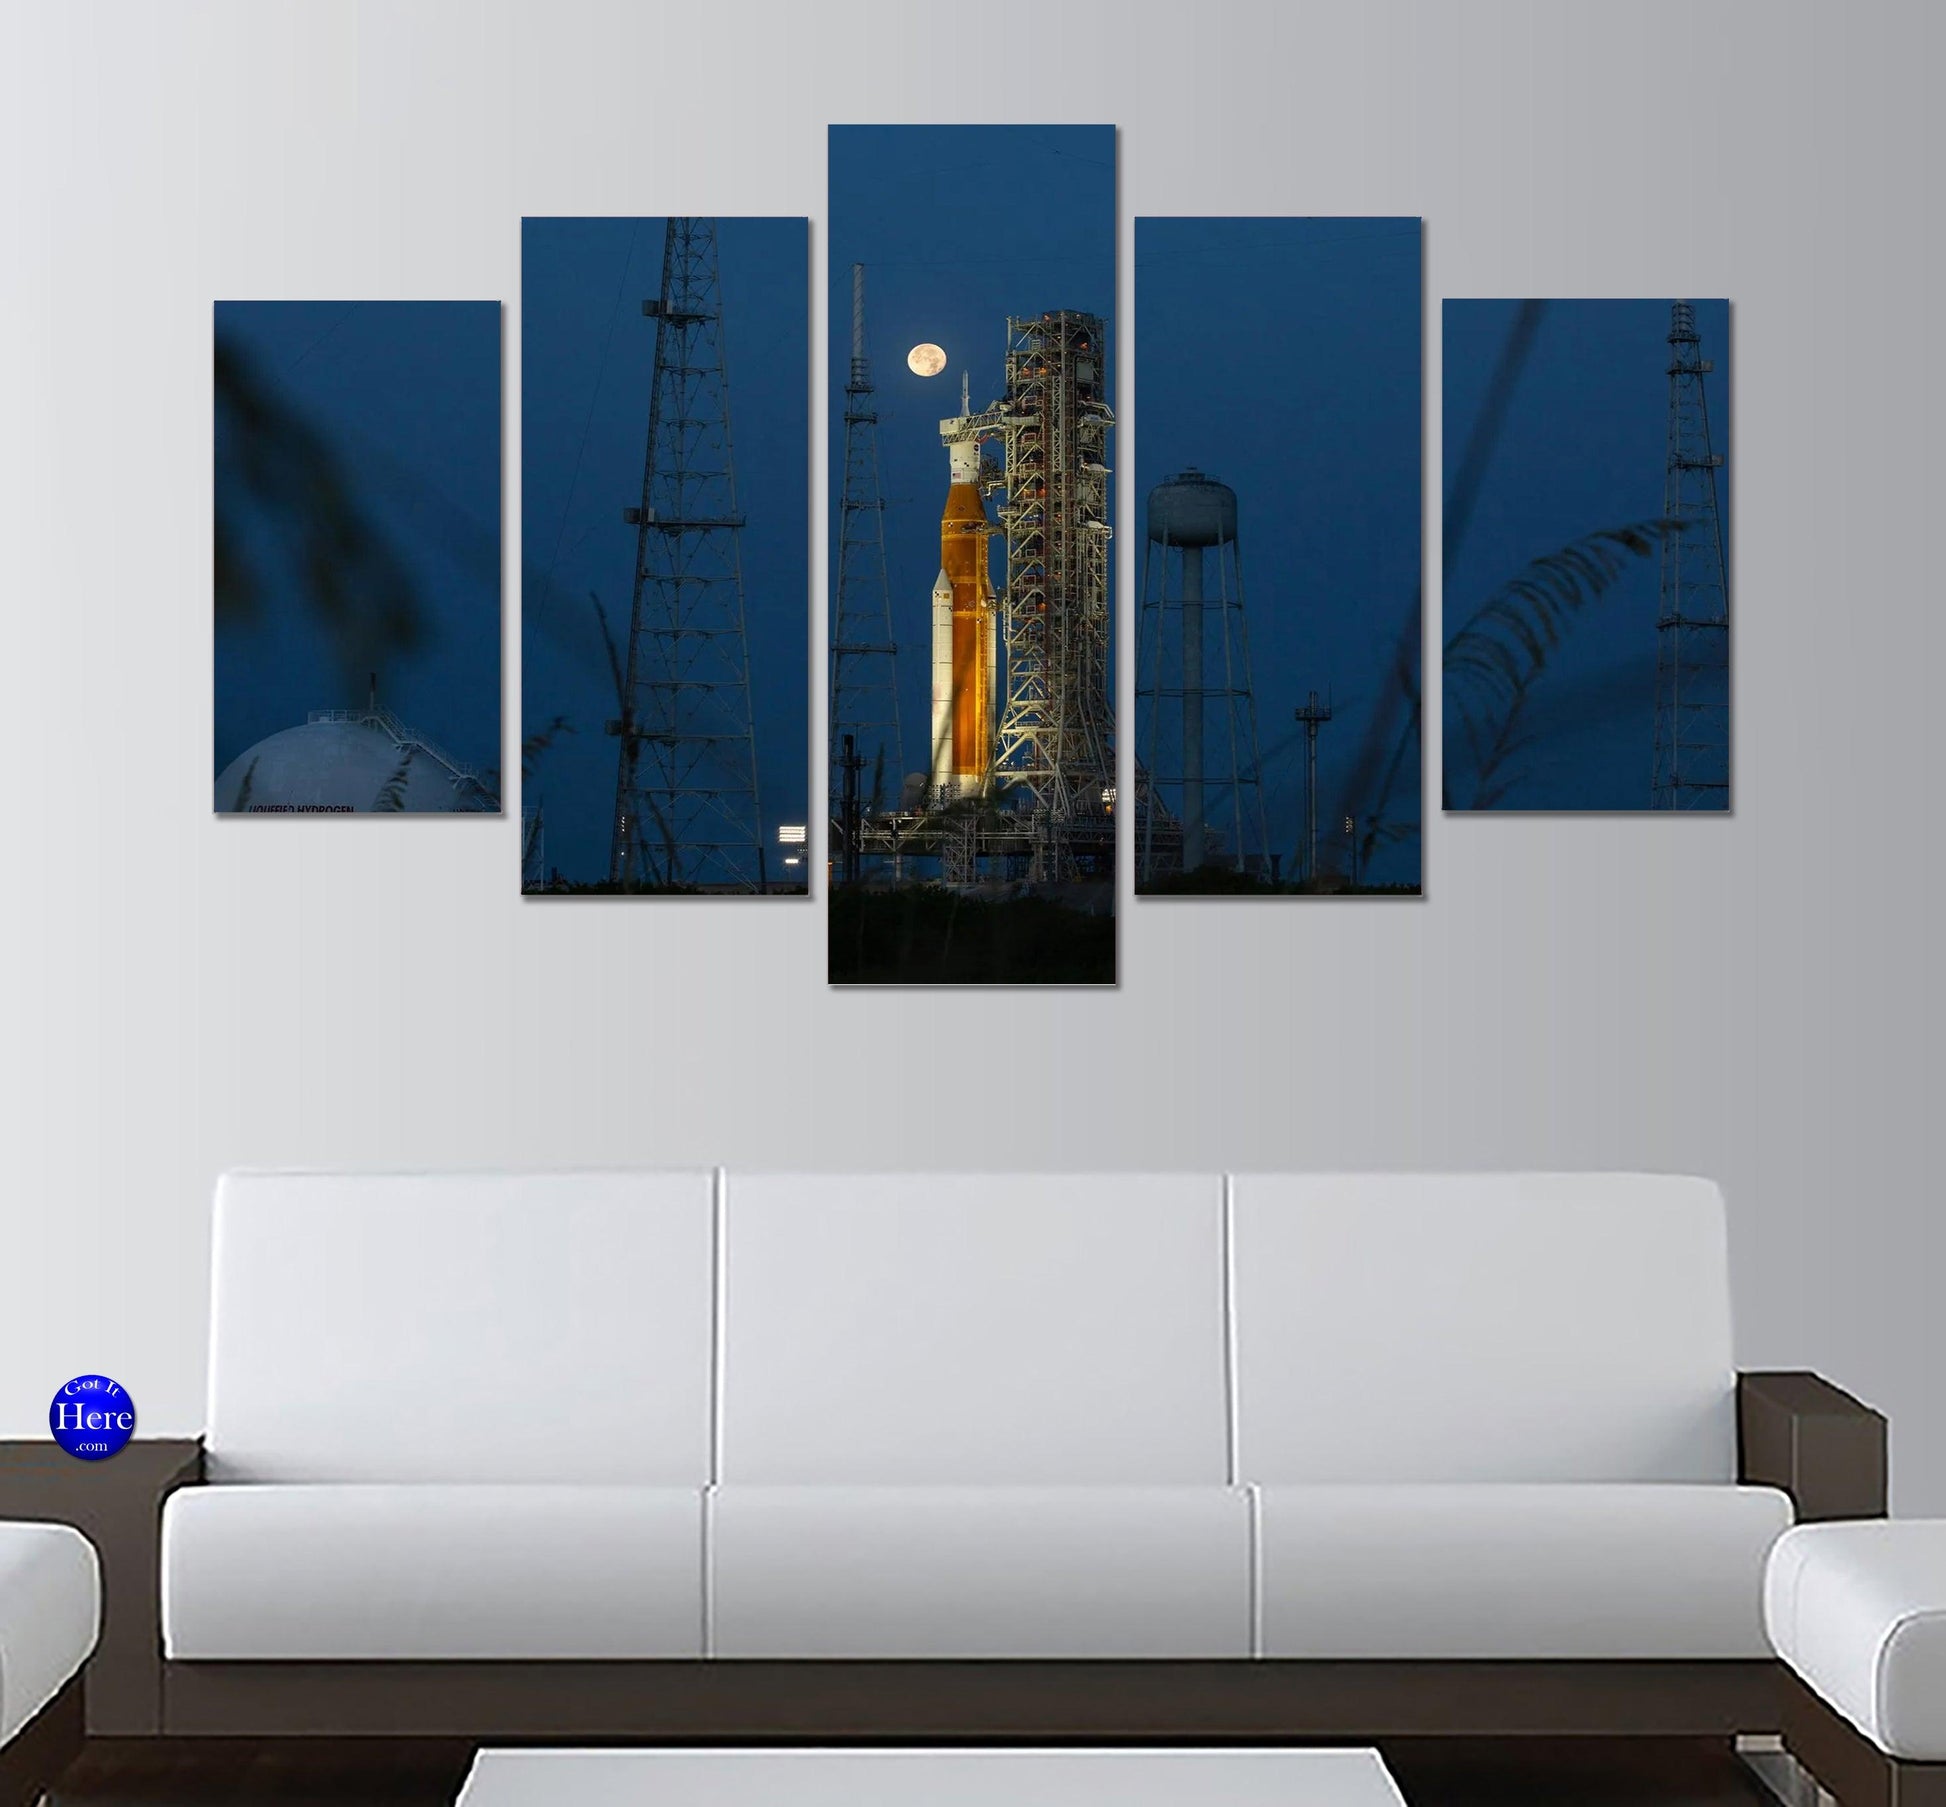 Moon Shines on the Space Launch System Rocket on the Launch Pad 5 Panel Canvas Print Wall Art - GotItHere.com